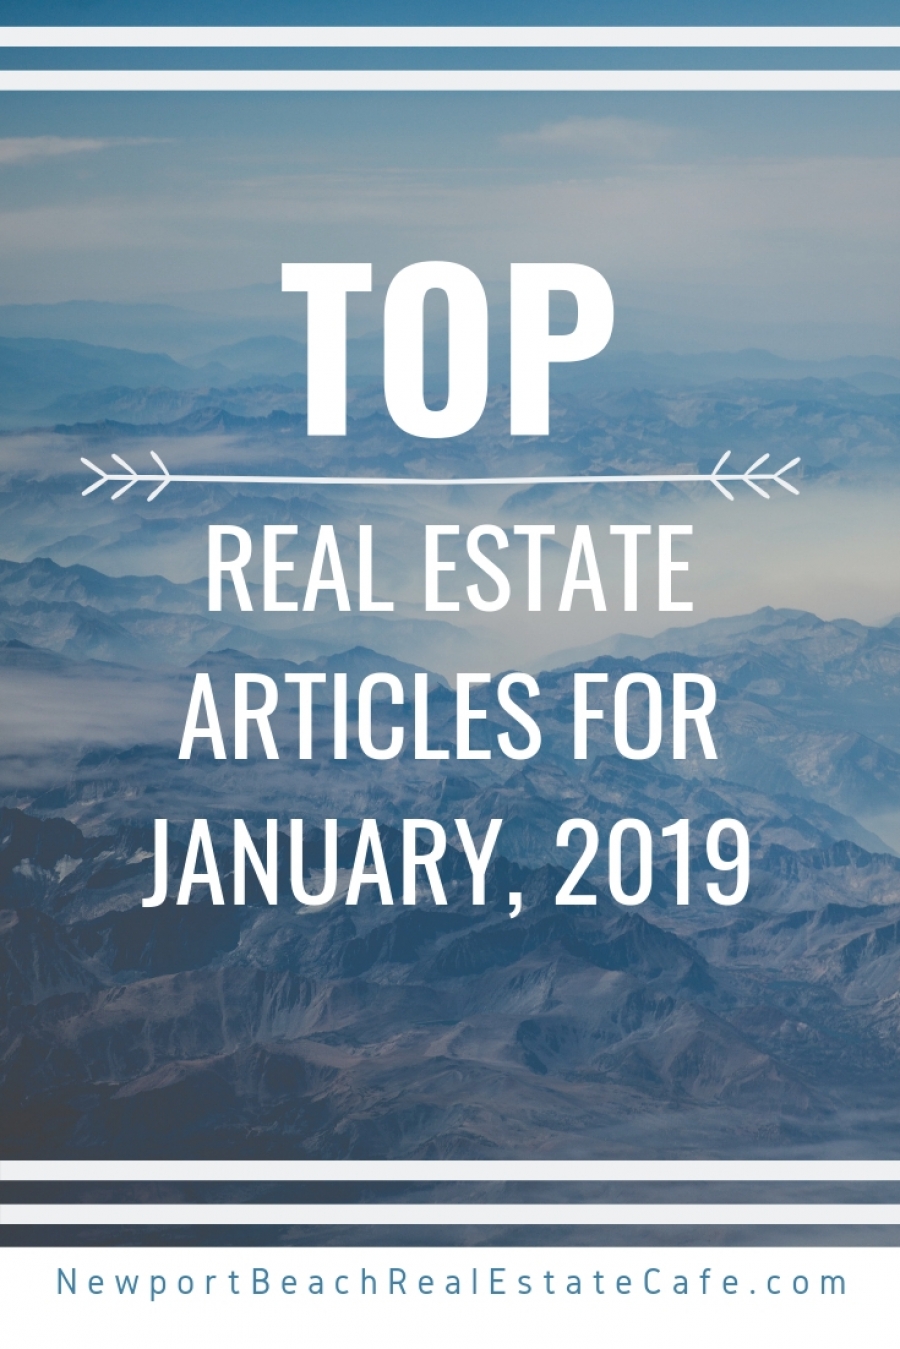 Top Real Estate Articles for January 2019